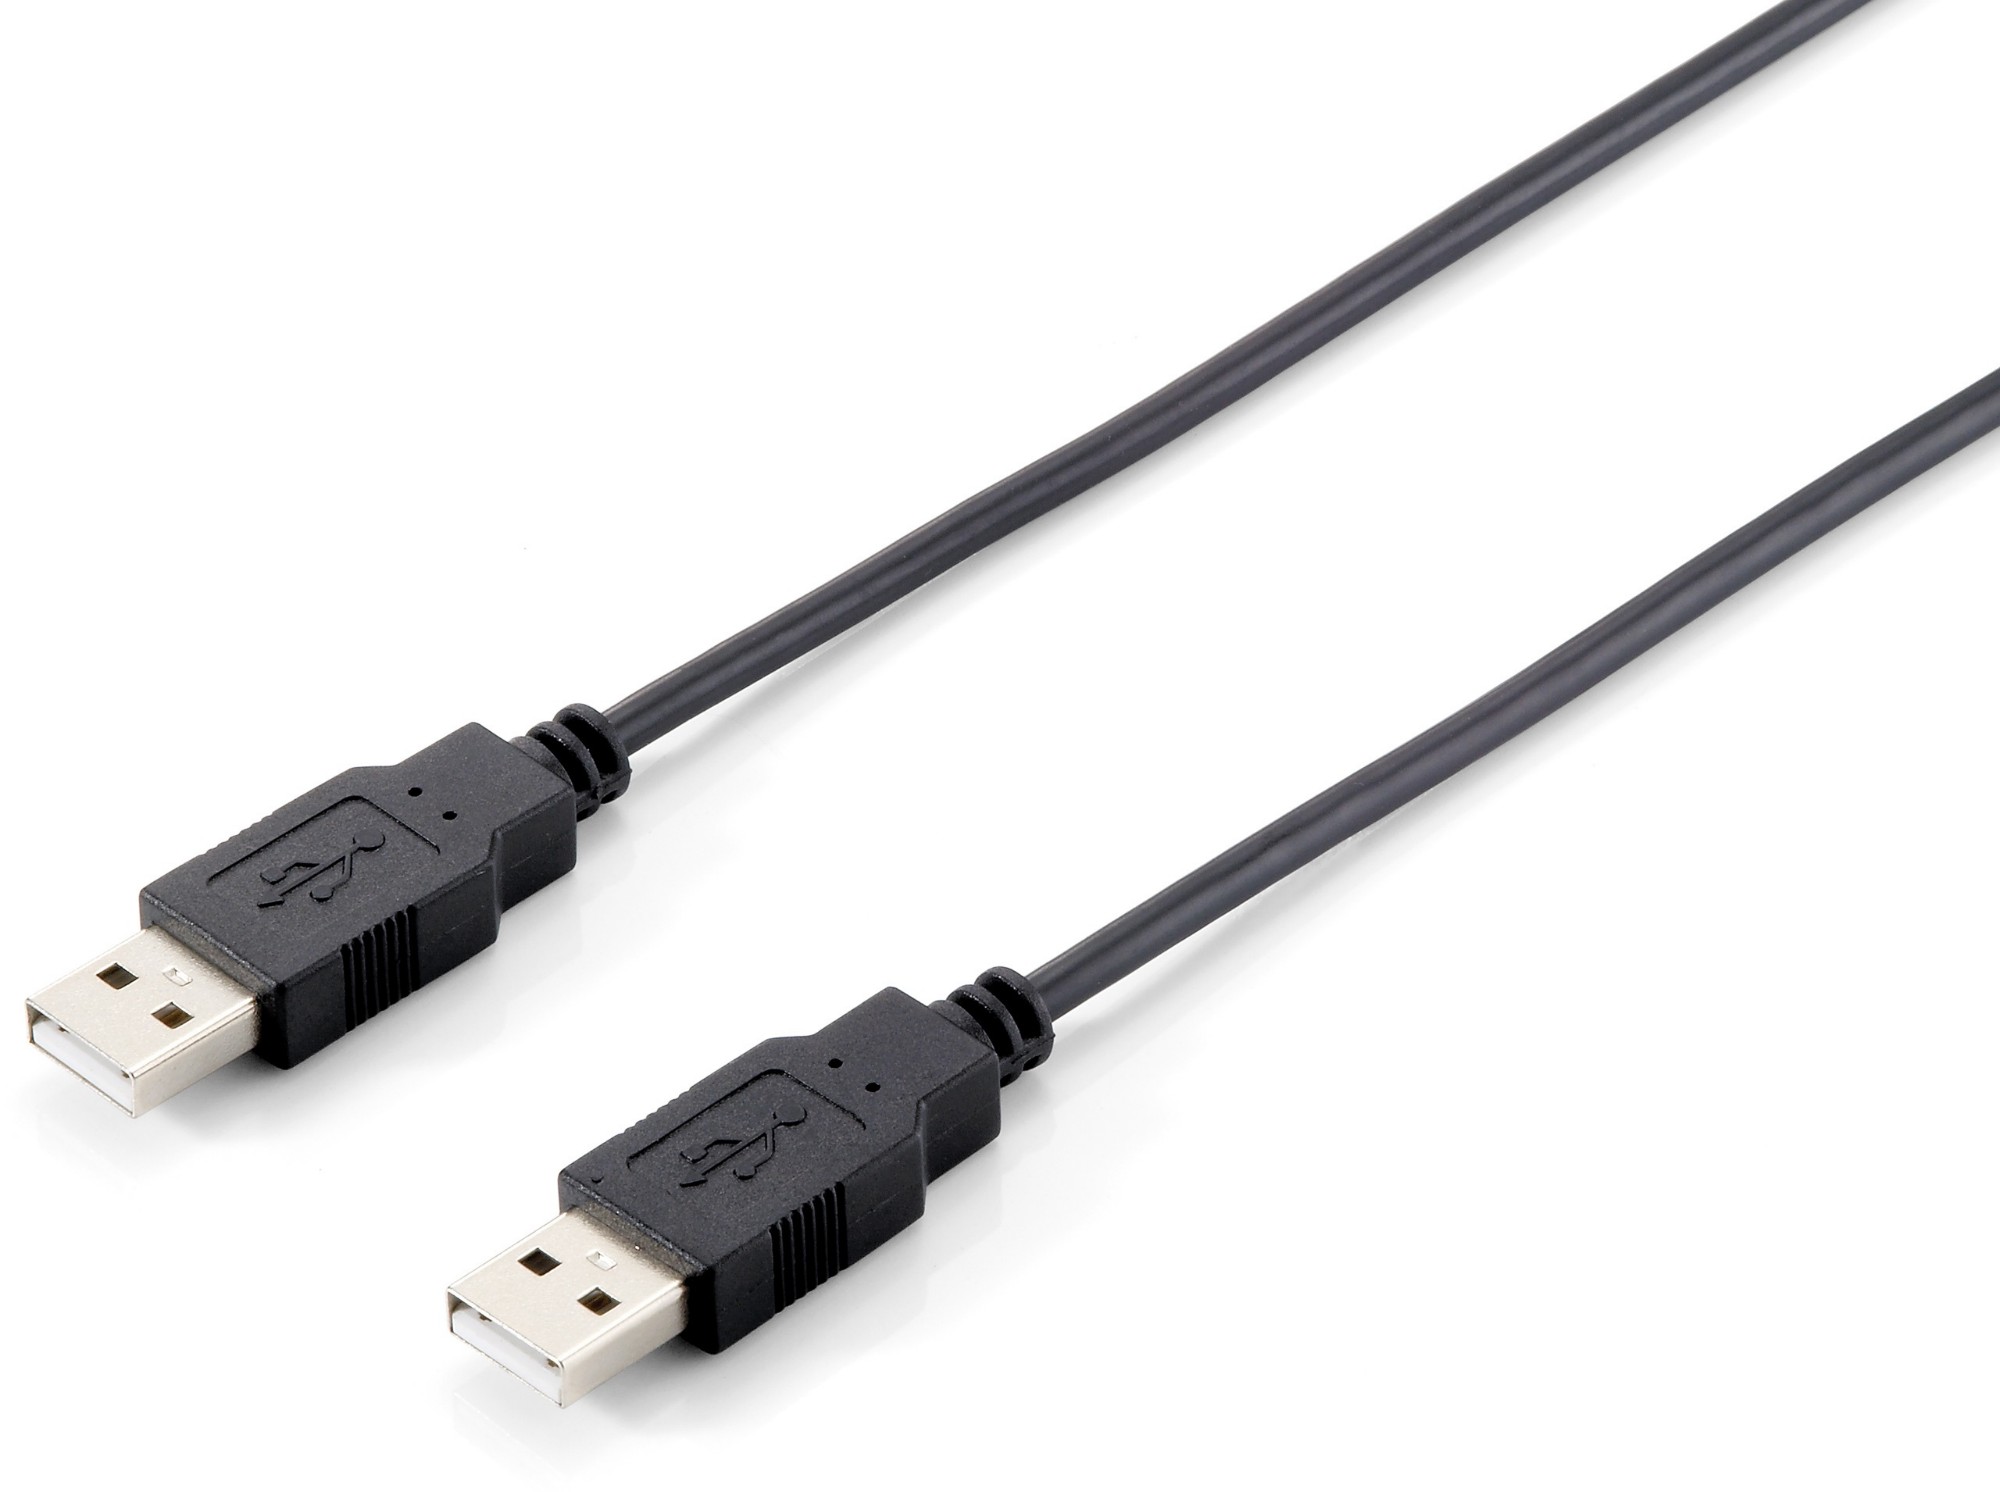 Photos - Cable (video, audio, USB) Equip USB 2.0 Type A Cable, 1.8m , Black 128870 